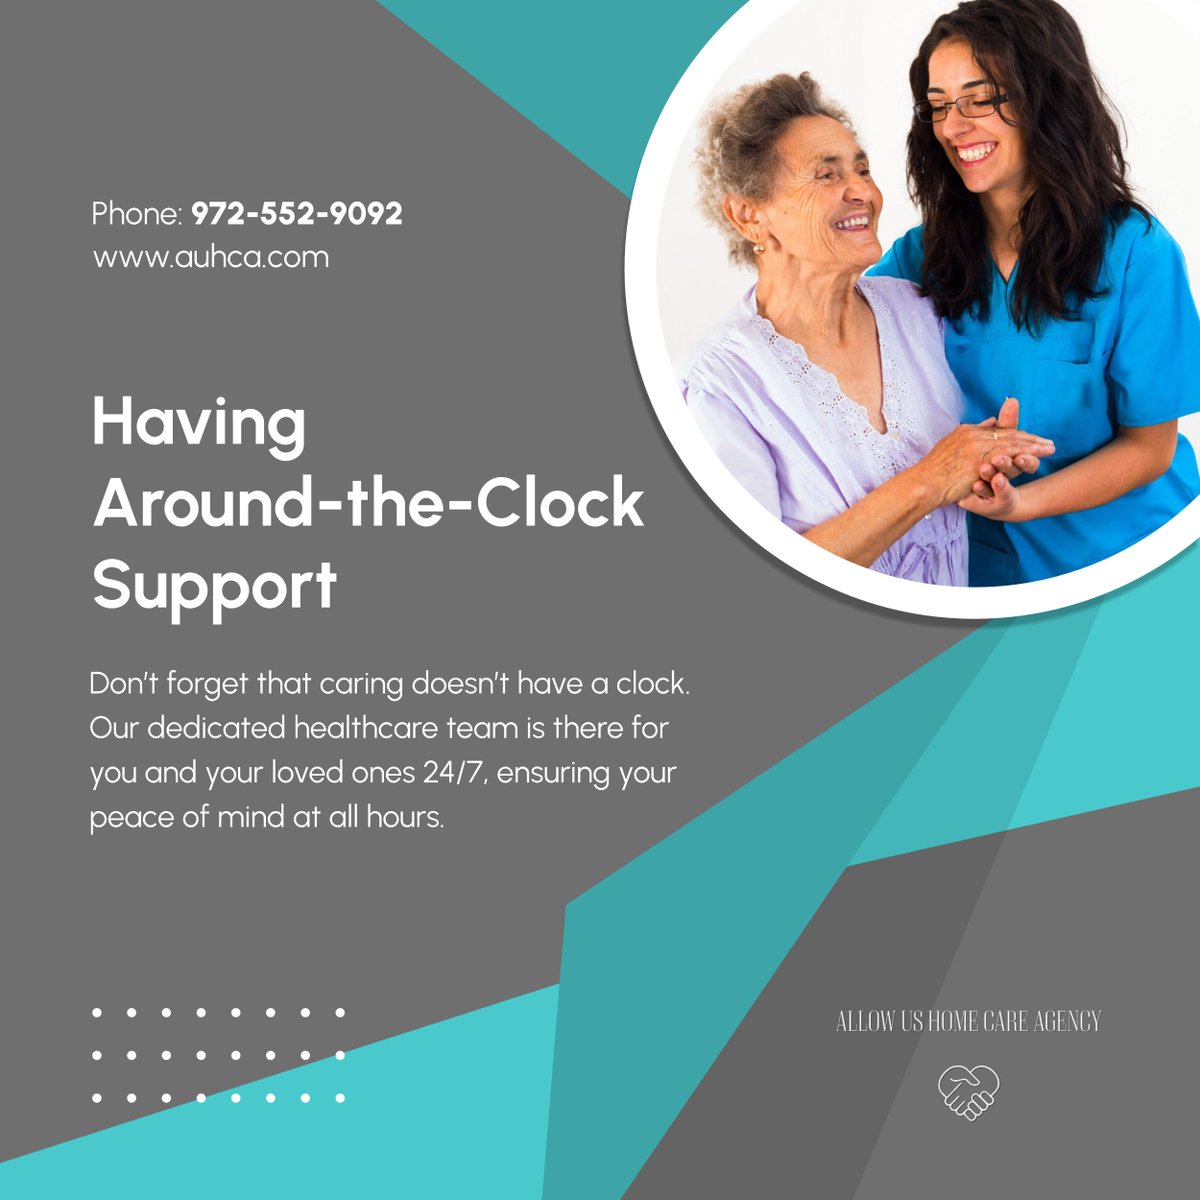 Our healthcare team’s around-the-clock availability ensures that you and your loved ones receive continual care and attention, offering peace of mind 24/7 for your family. 

#QualityCare #RoundTheClockCare #HomeCare